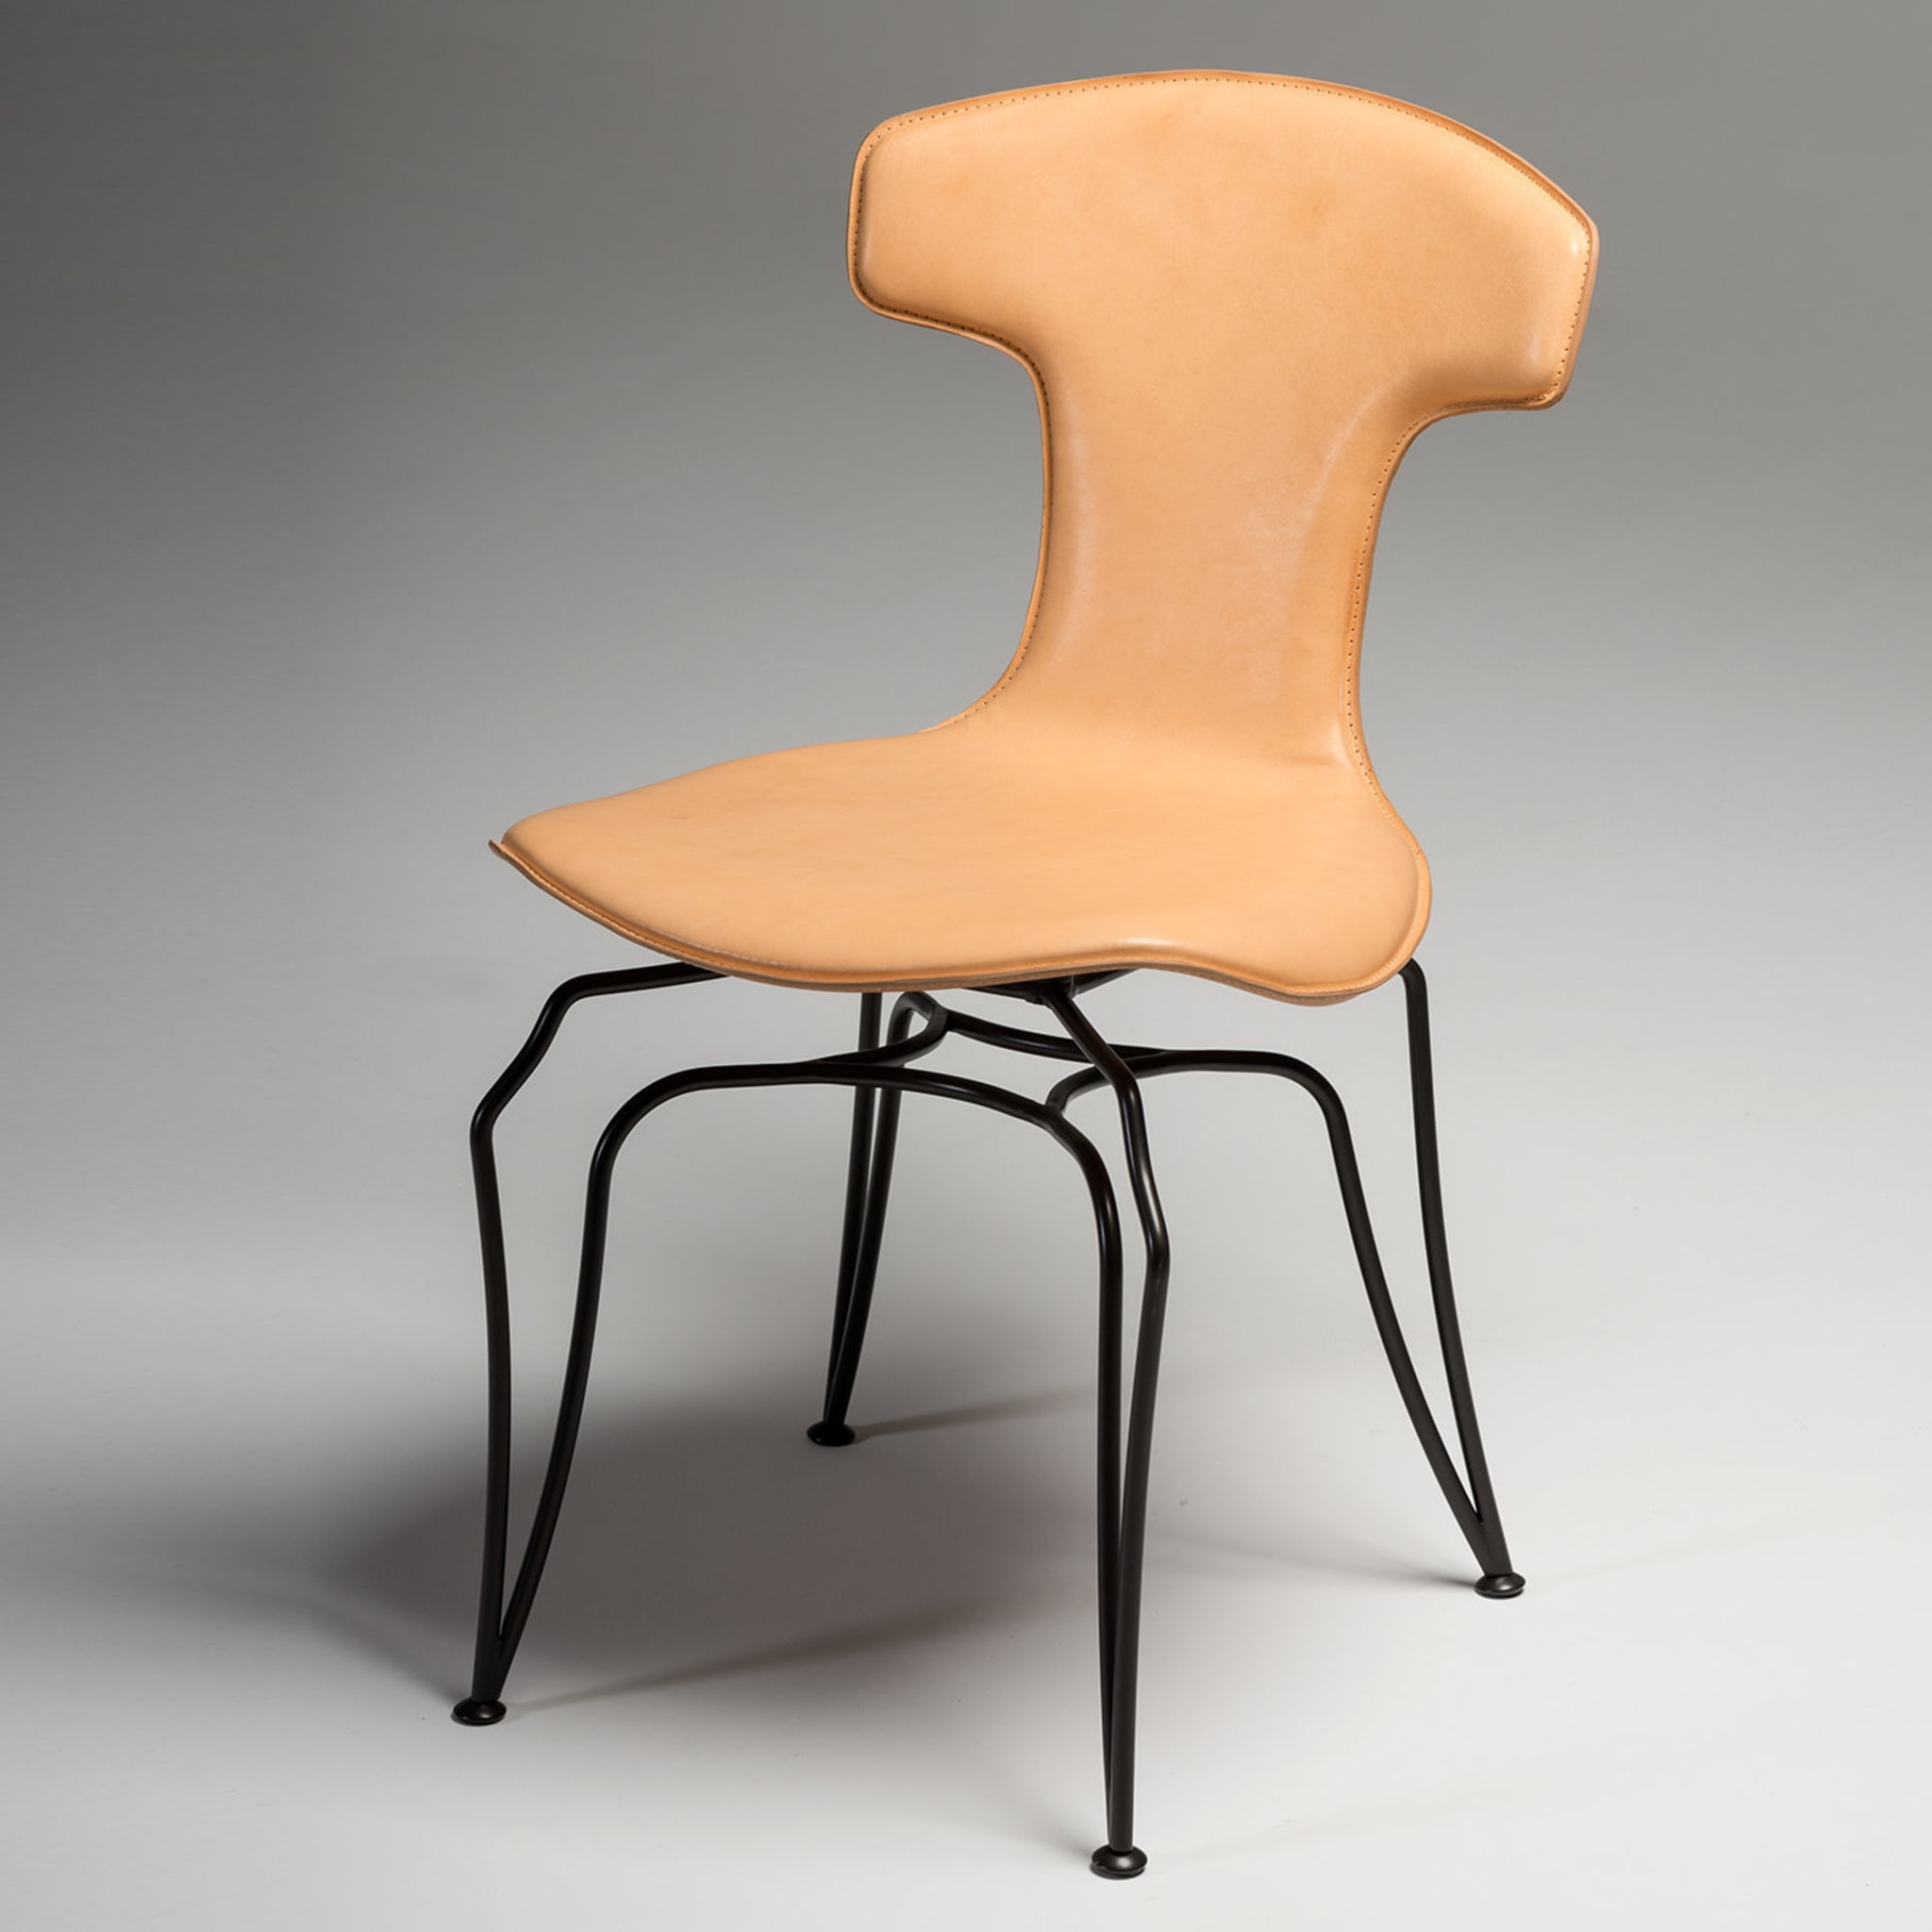 Jole Chair Tribeca Collection by Marco and Giulio Mantellassi - Alternative view 1